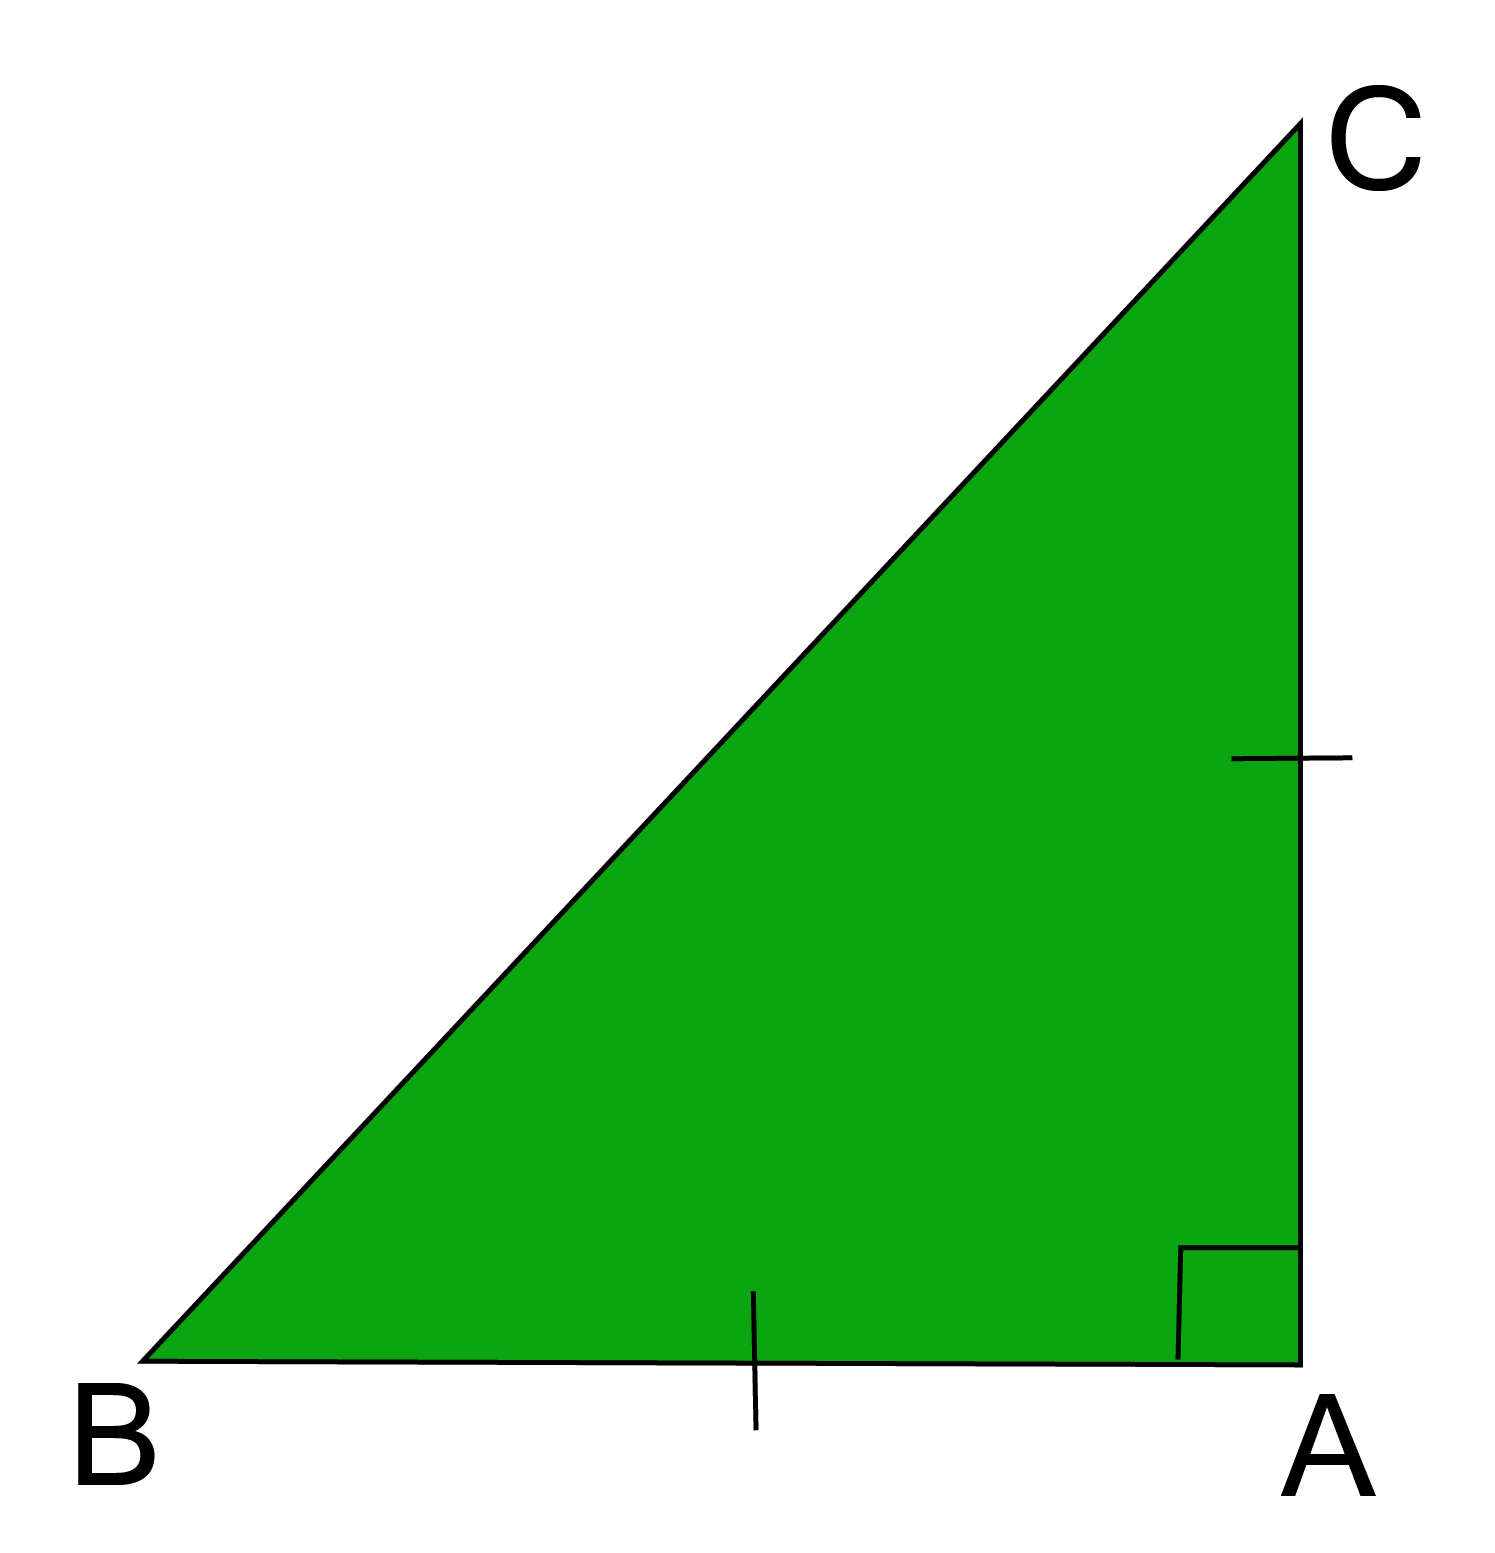 ABC is a right angled triangle in which $\angle {\text{A}}$ = ${90^0}$ and AB = AC